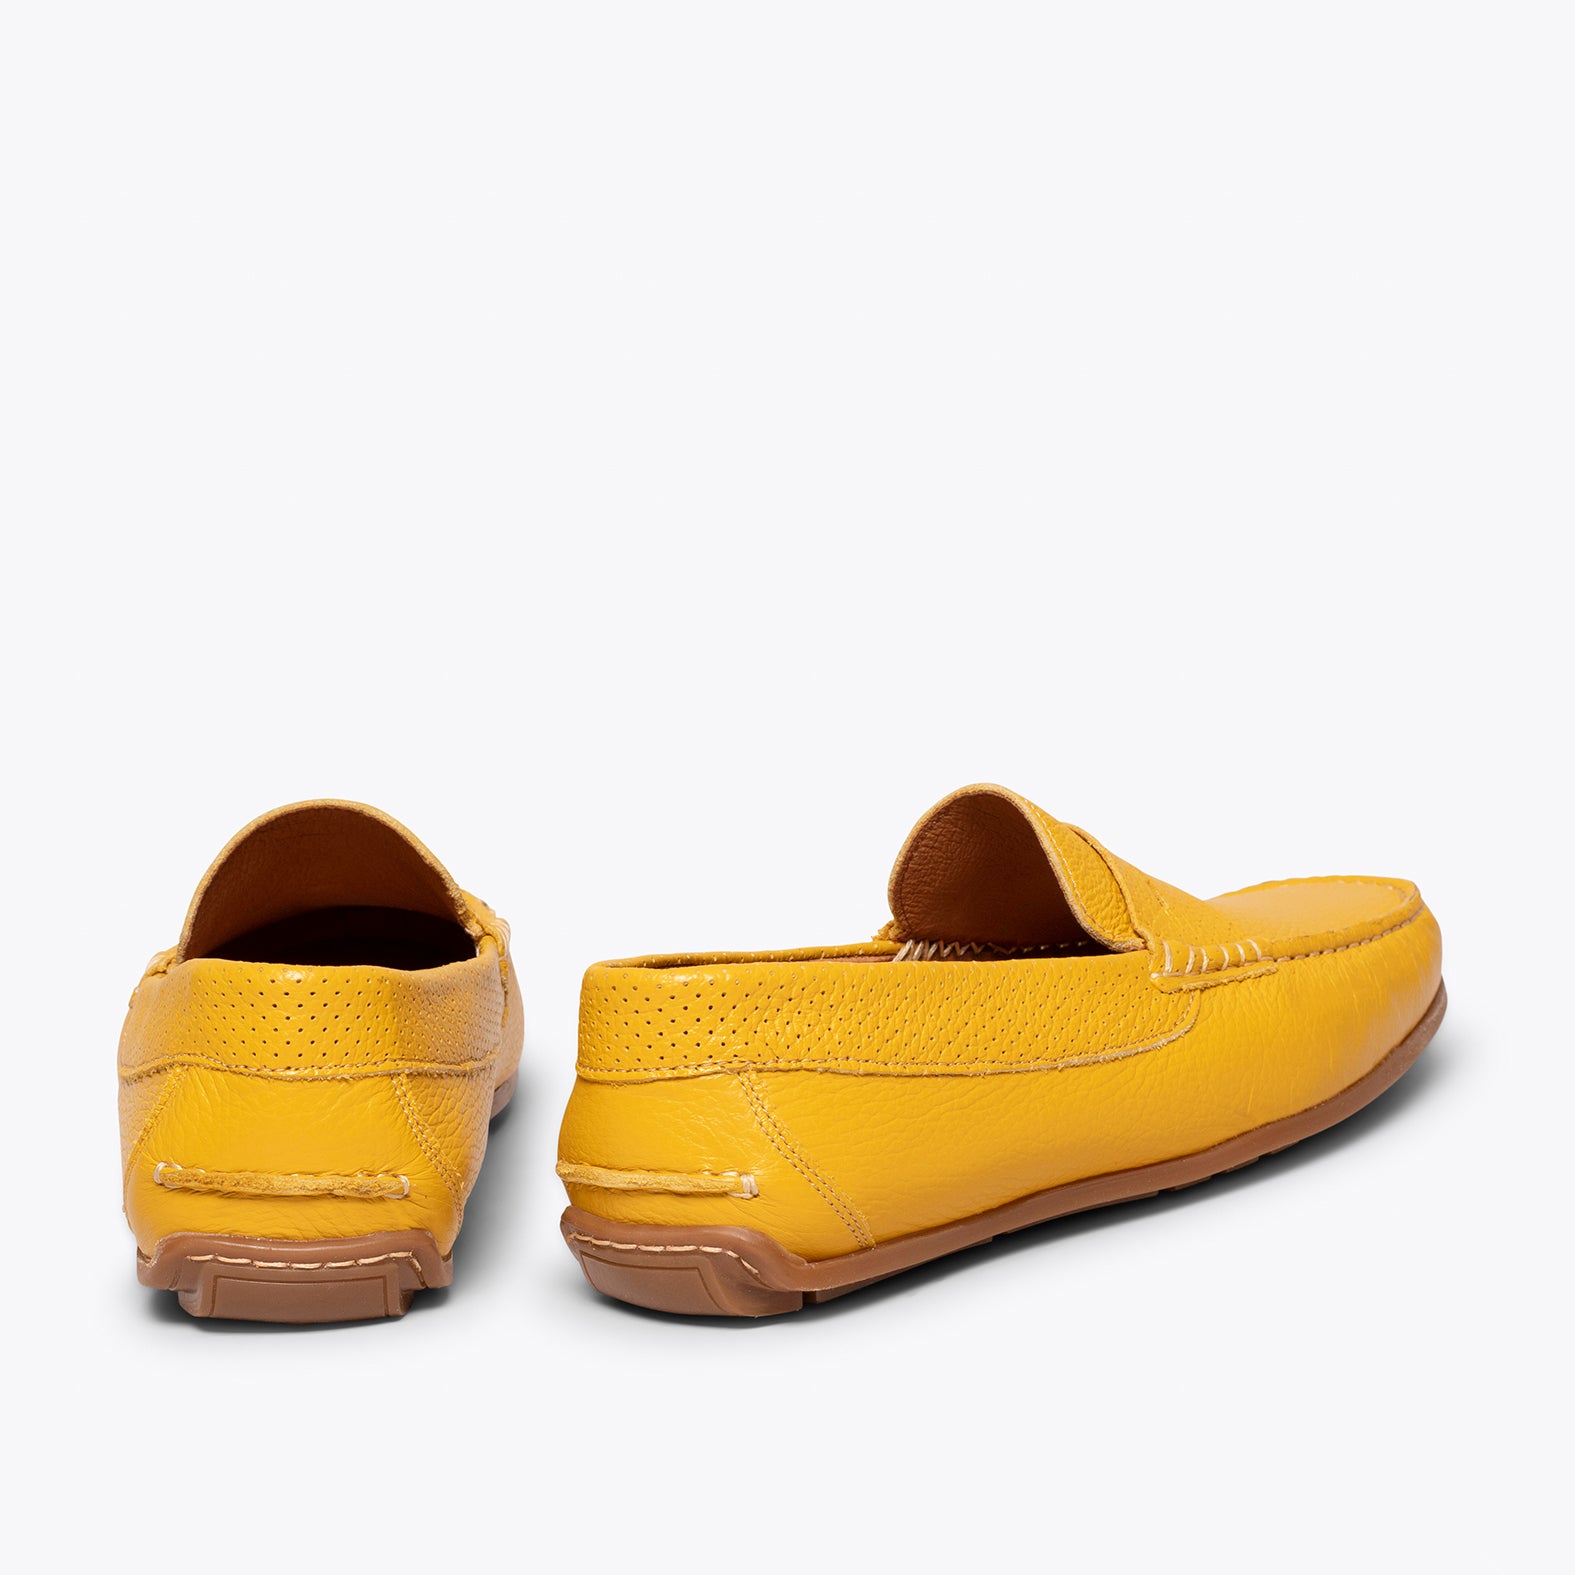 MOCCASIN – YELLOW nappa leather loafer for men